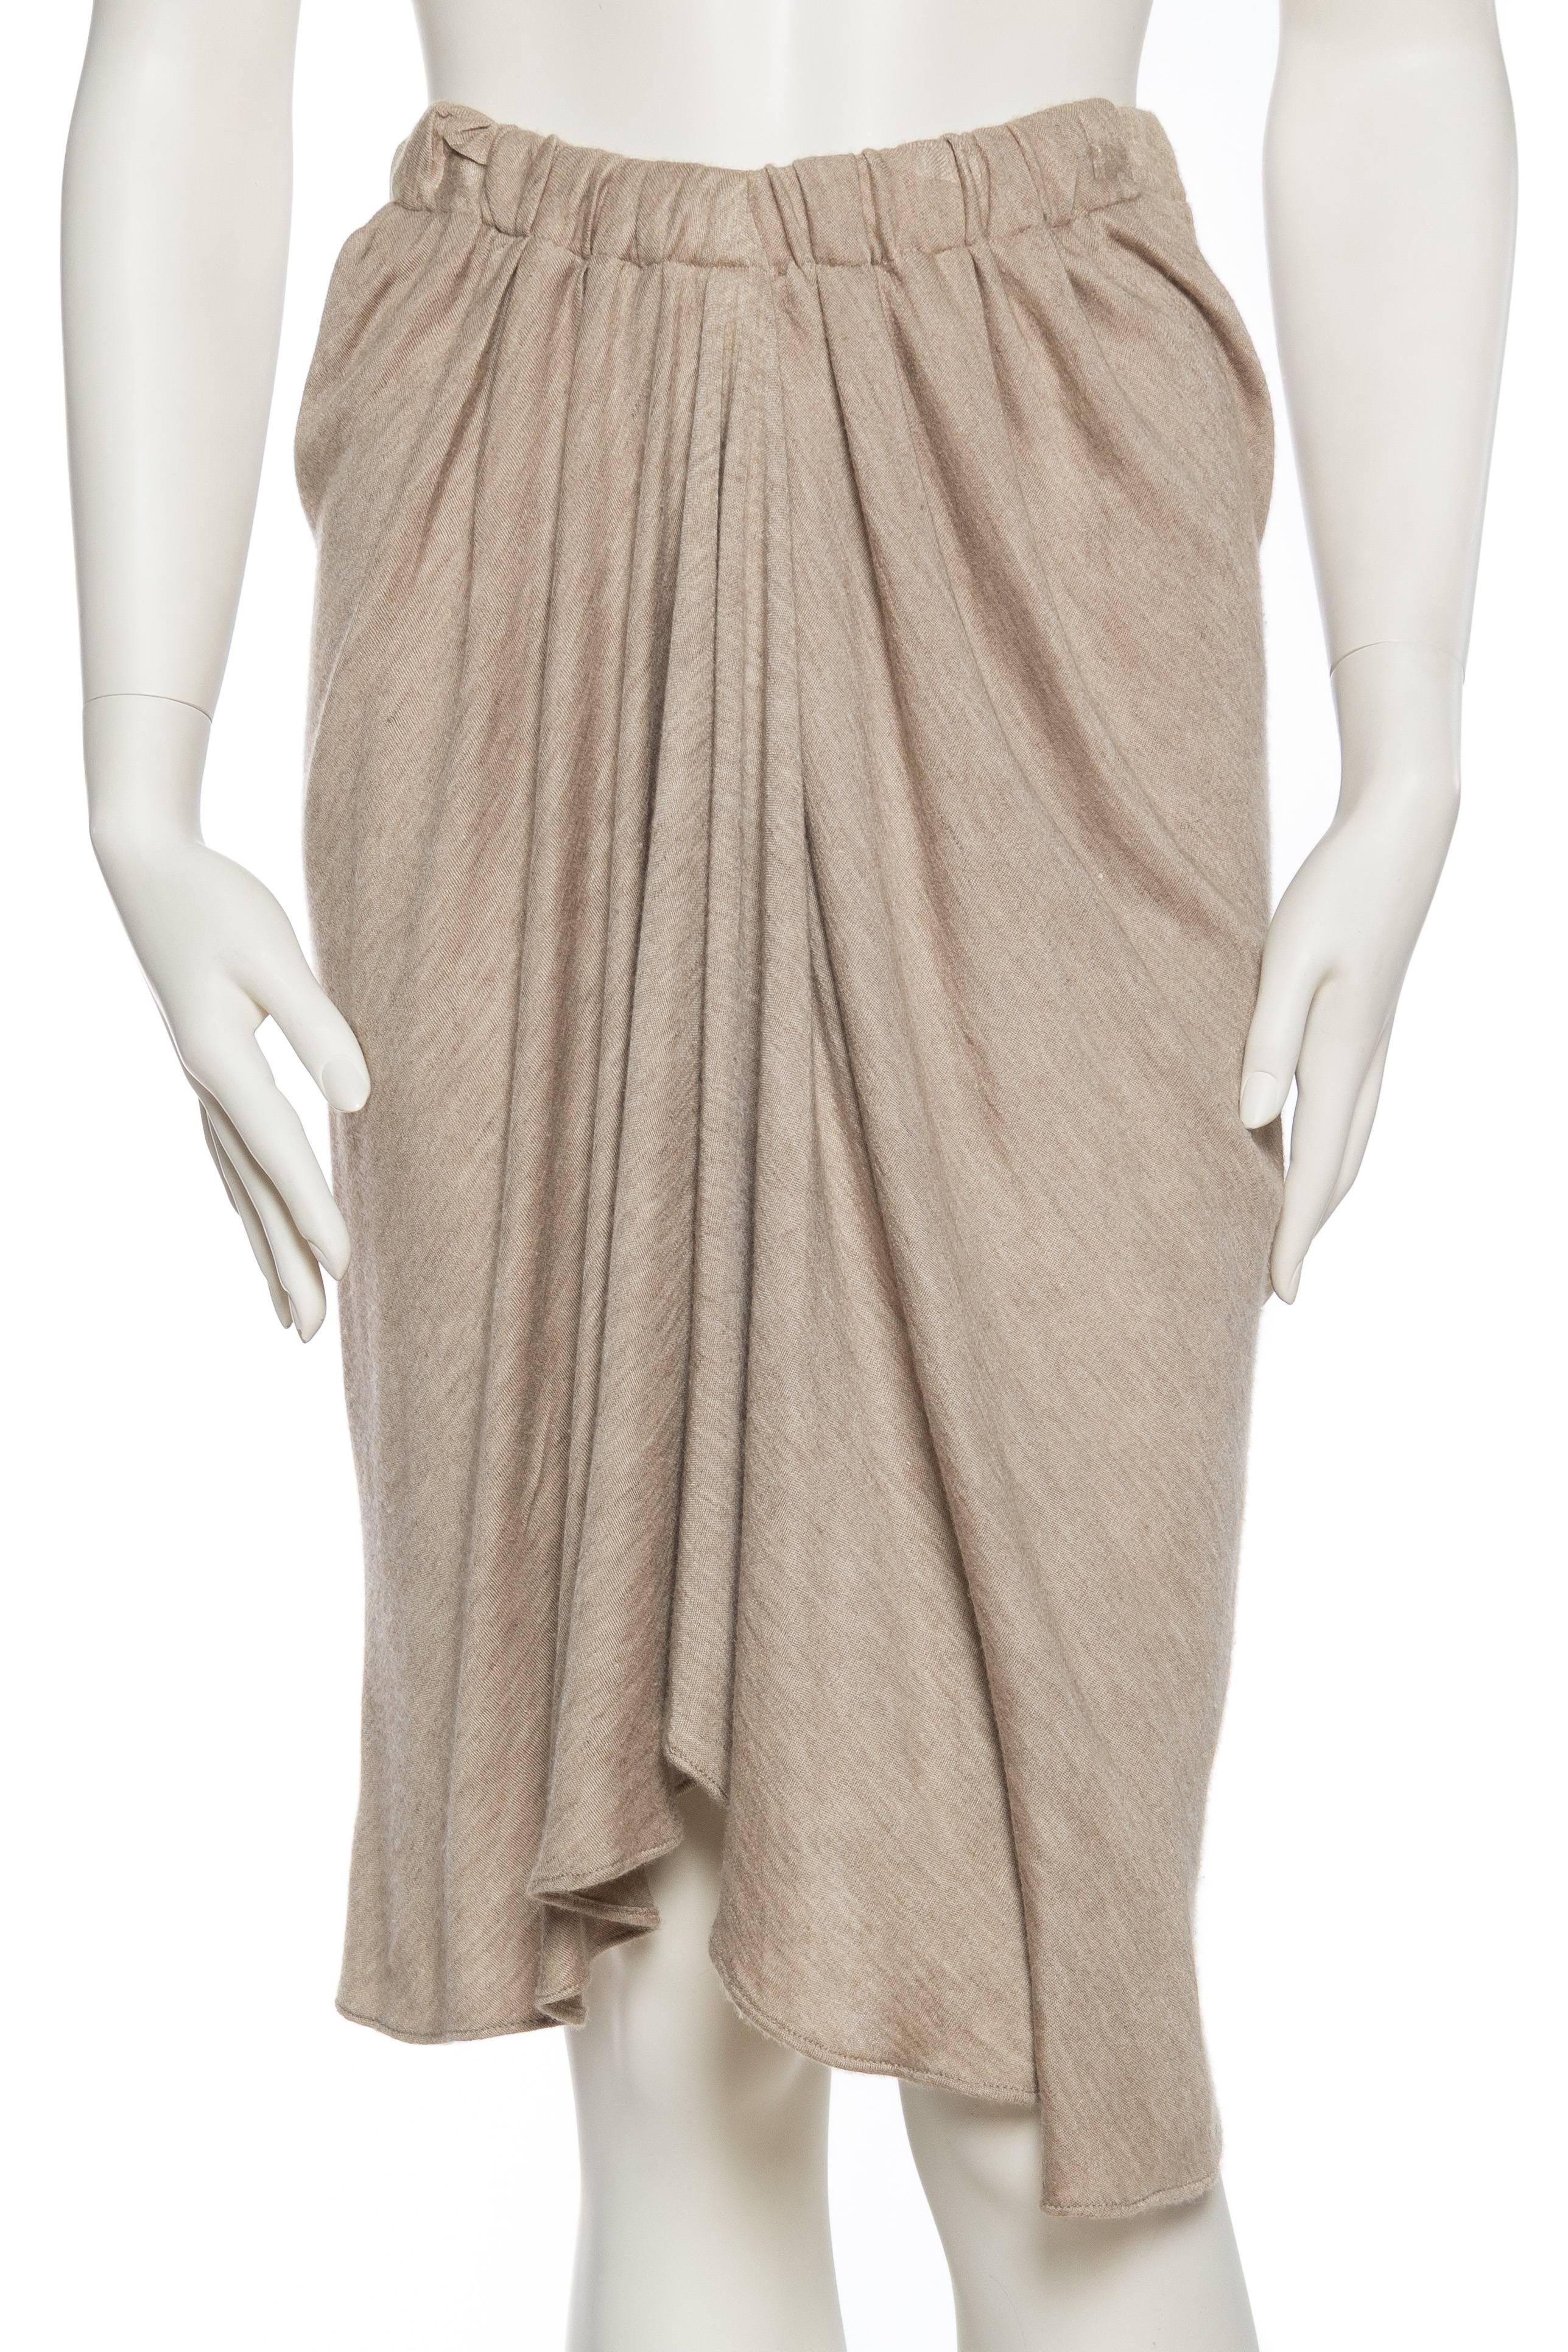 Donna Karan Draped Cashmere Skirt with elastic waist for varying sizes. 